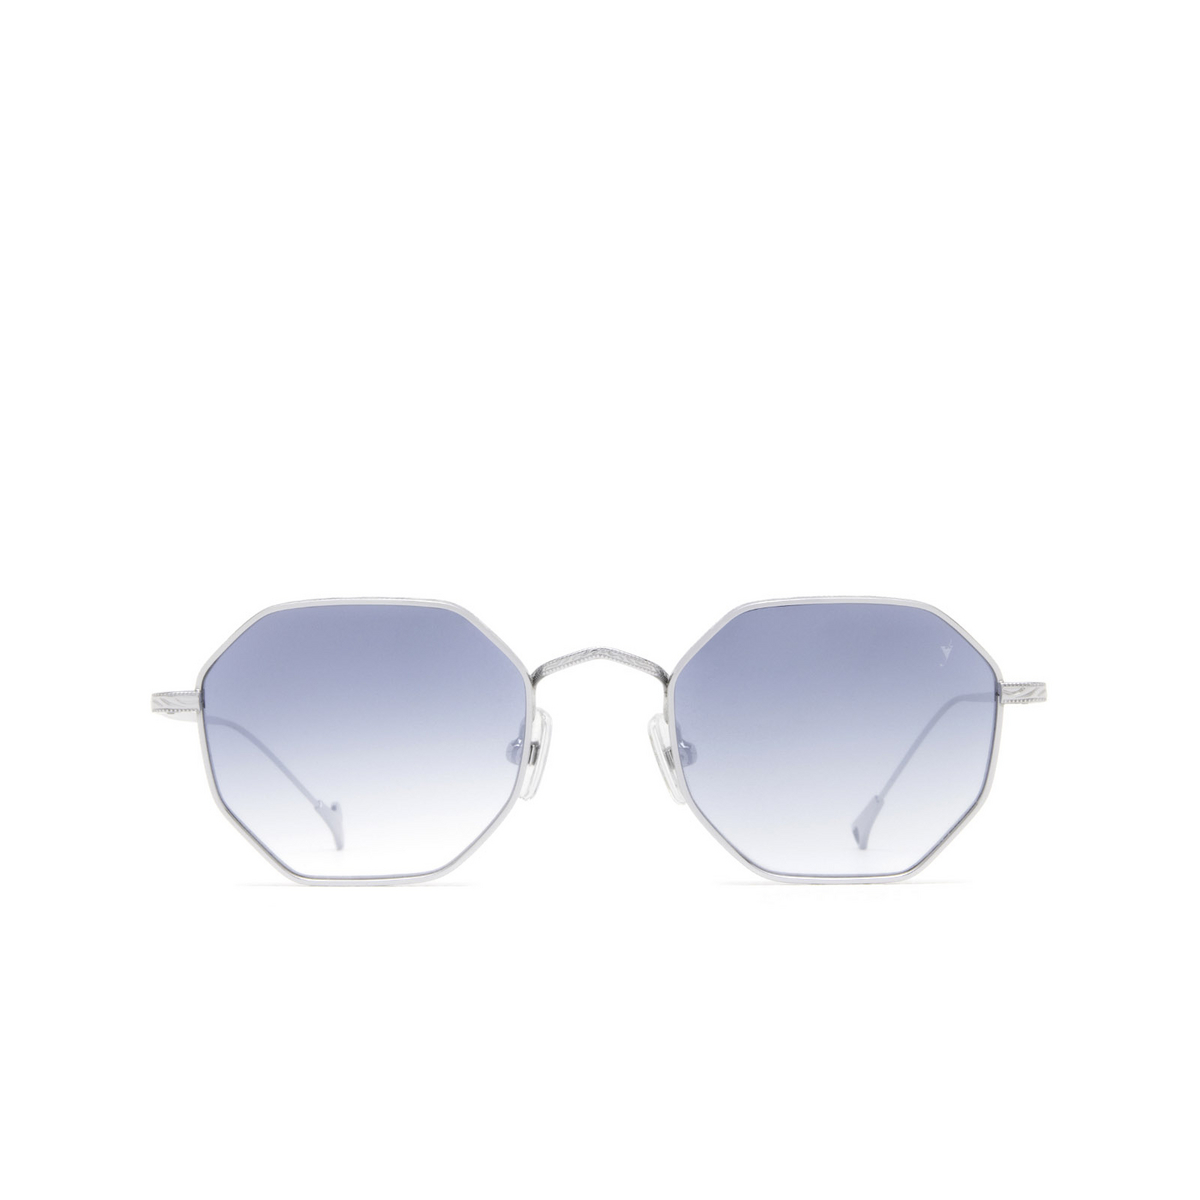 Eyepetizer® Irregular Sunglasses: Hort color Silver C.1-26F - front view.